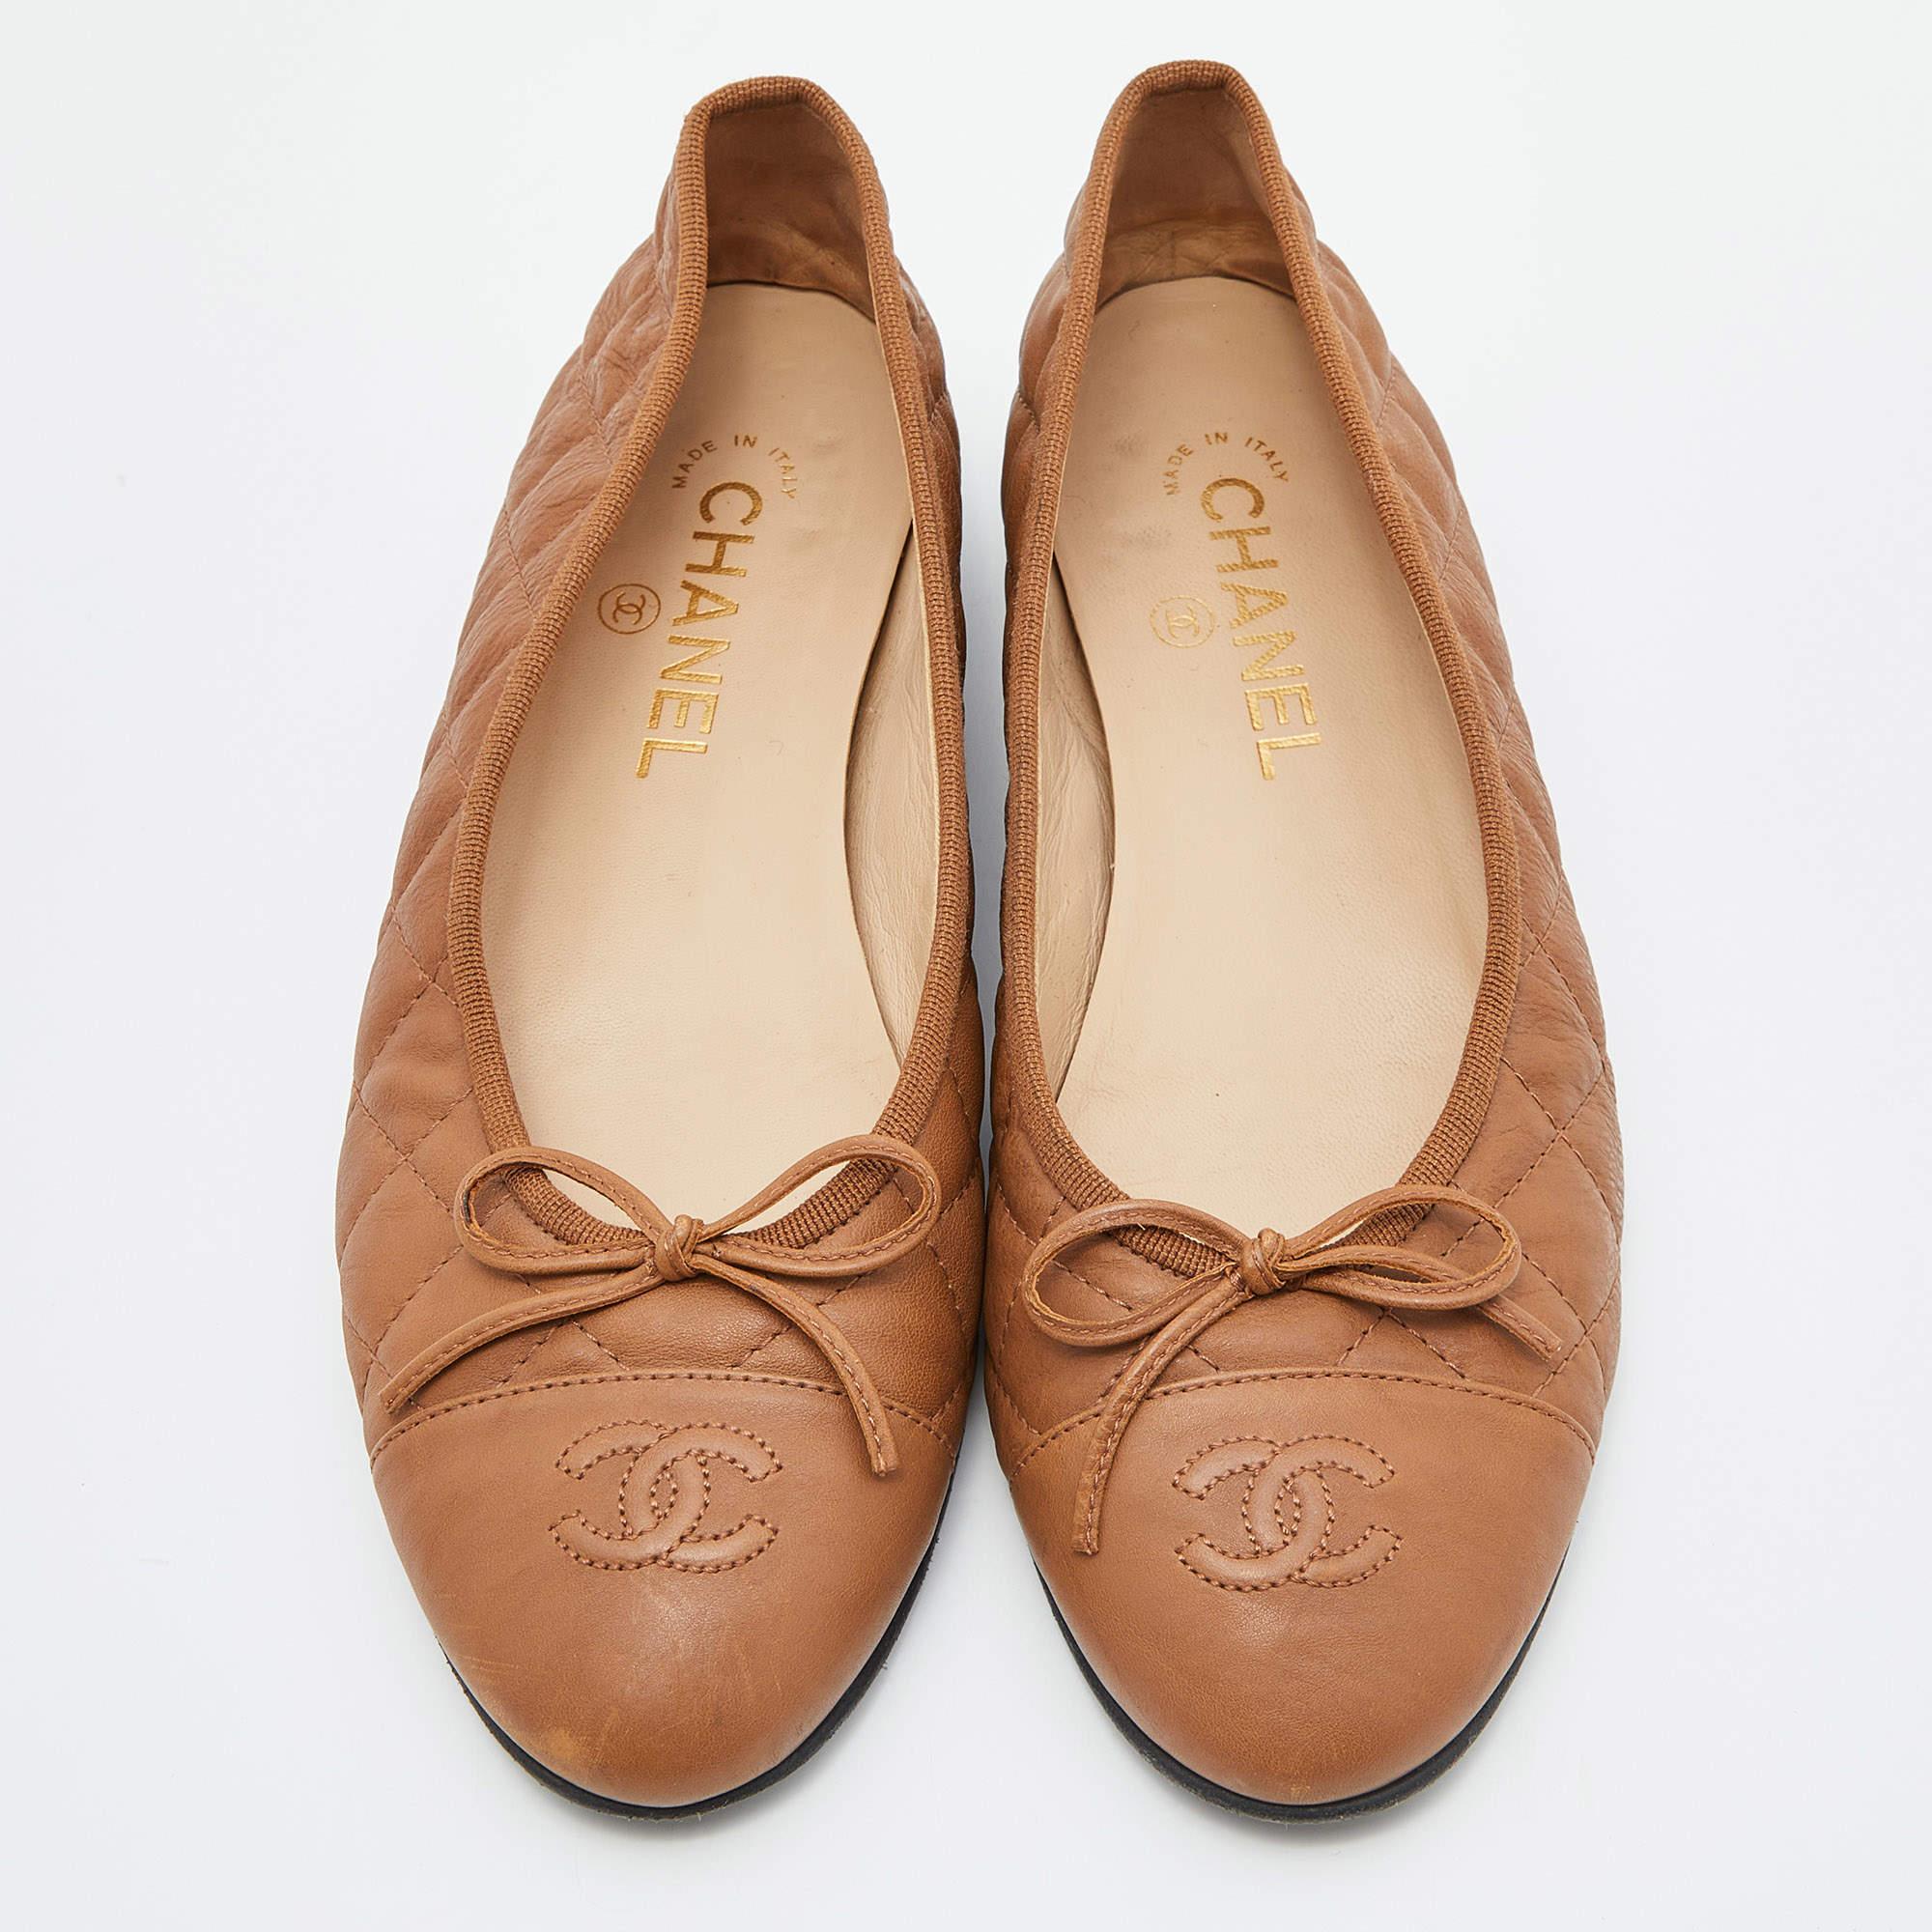 Step out in these stylish Chanel ballet flats to bring out your fashionable side. Crafted from brown-hued quilted leather, the pair features cap toes with stitched CC logo details, bows on the vamps, and durable outsoles.

